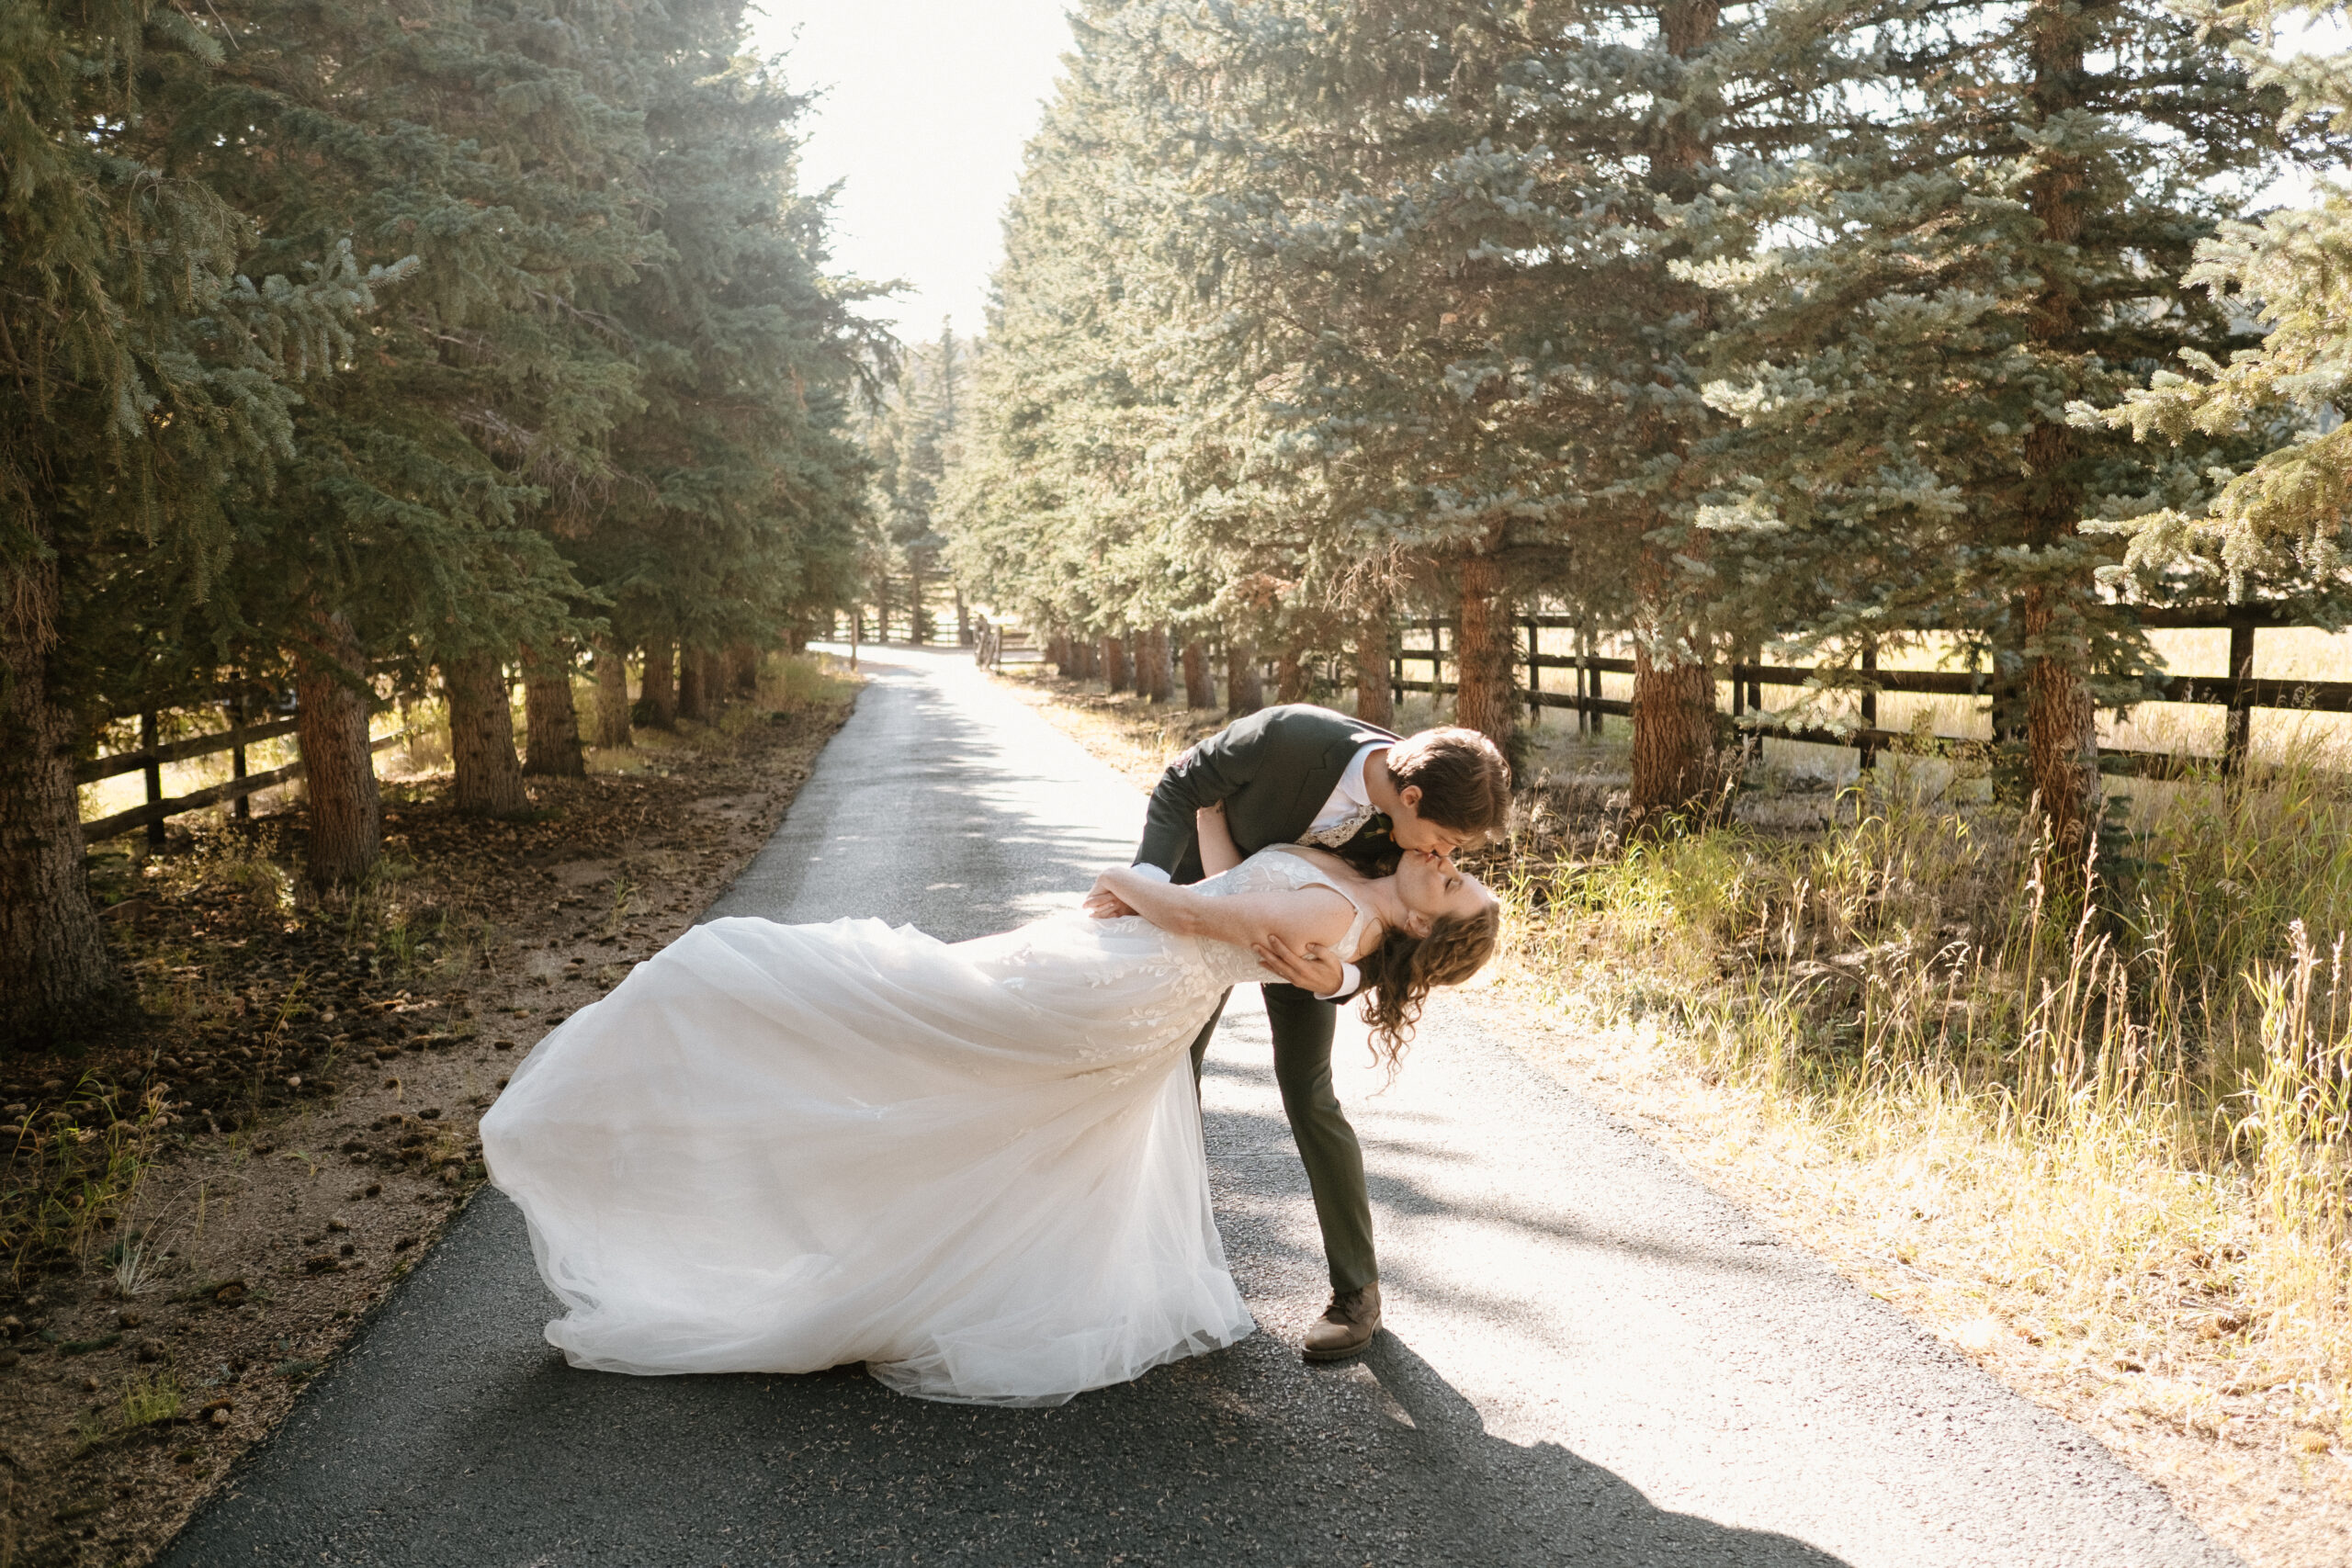 Groom dips bride and they share a kiss on a road surrounded by pine trees in Colorado